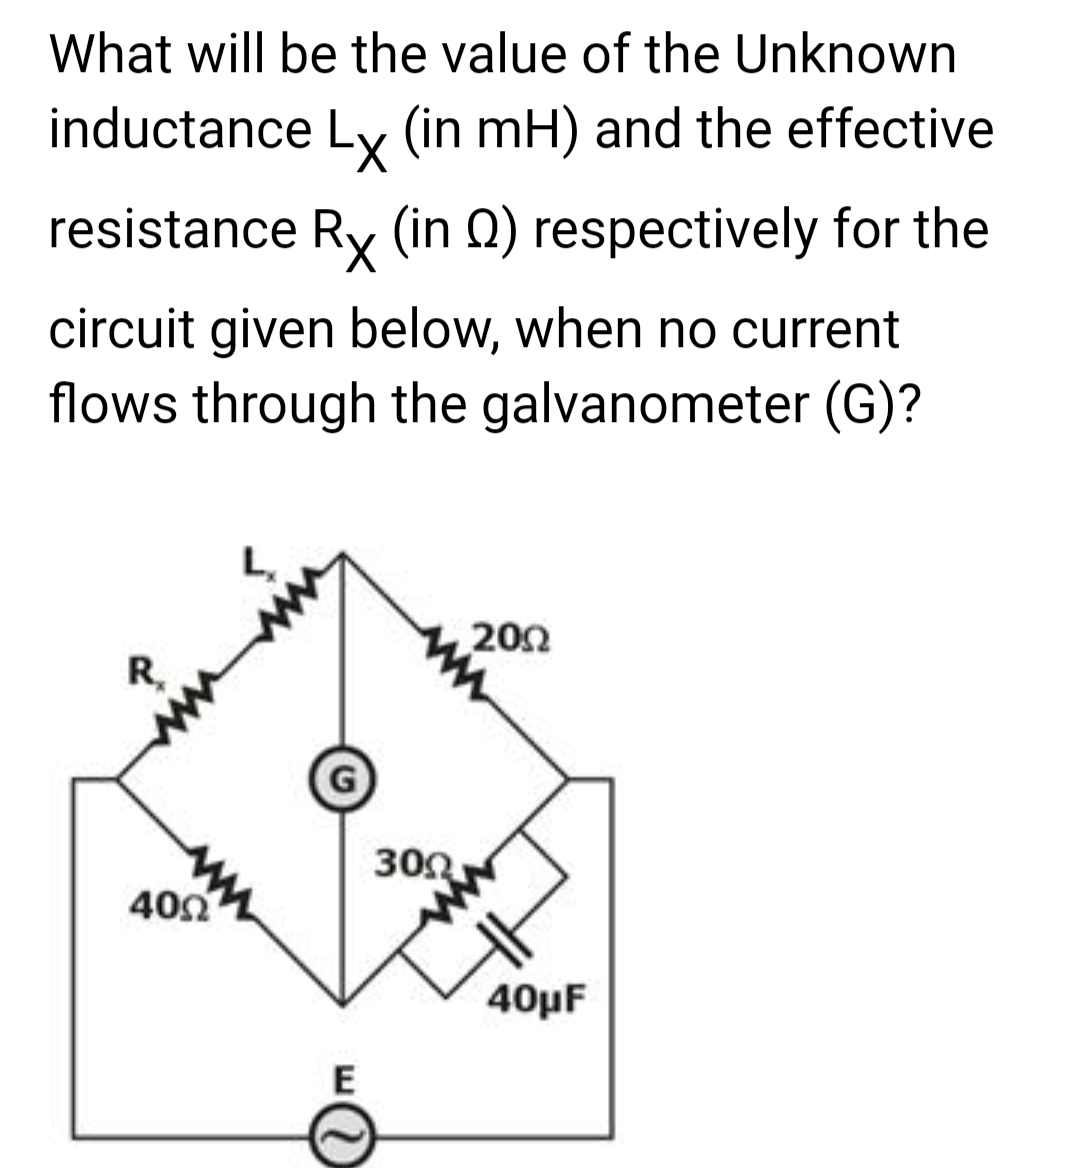 What will be the value of the Unknown
inductance Lx (in mH) and the effective
resistance Rx (in 2) respectively for the
circuit given below, when no current
flows through the galvanometer (G)?
R
400
E
3002
2002
40μF